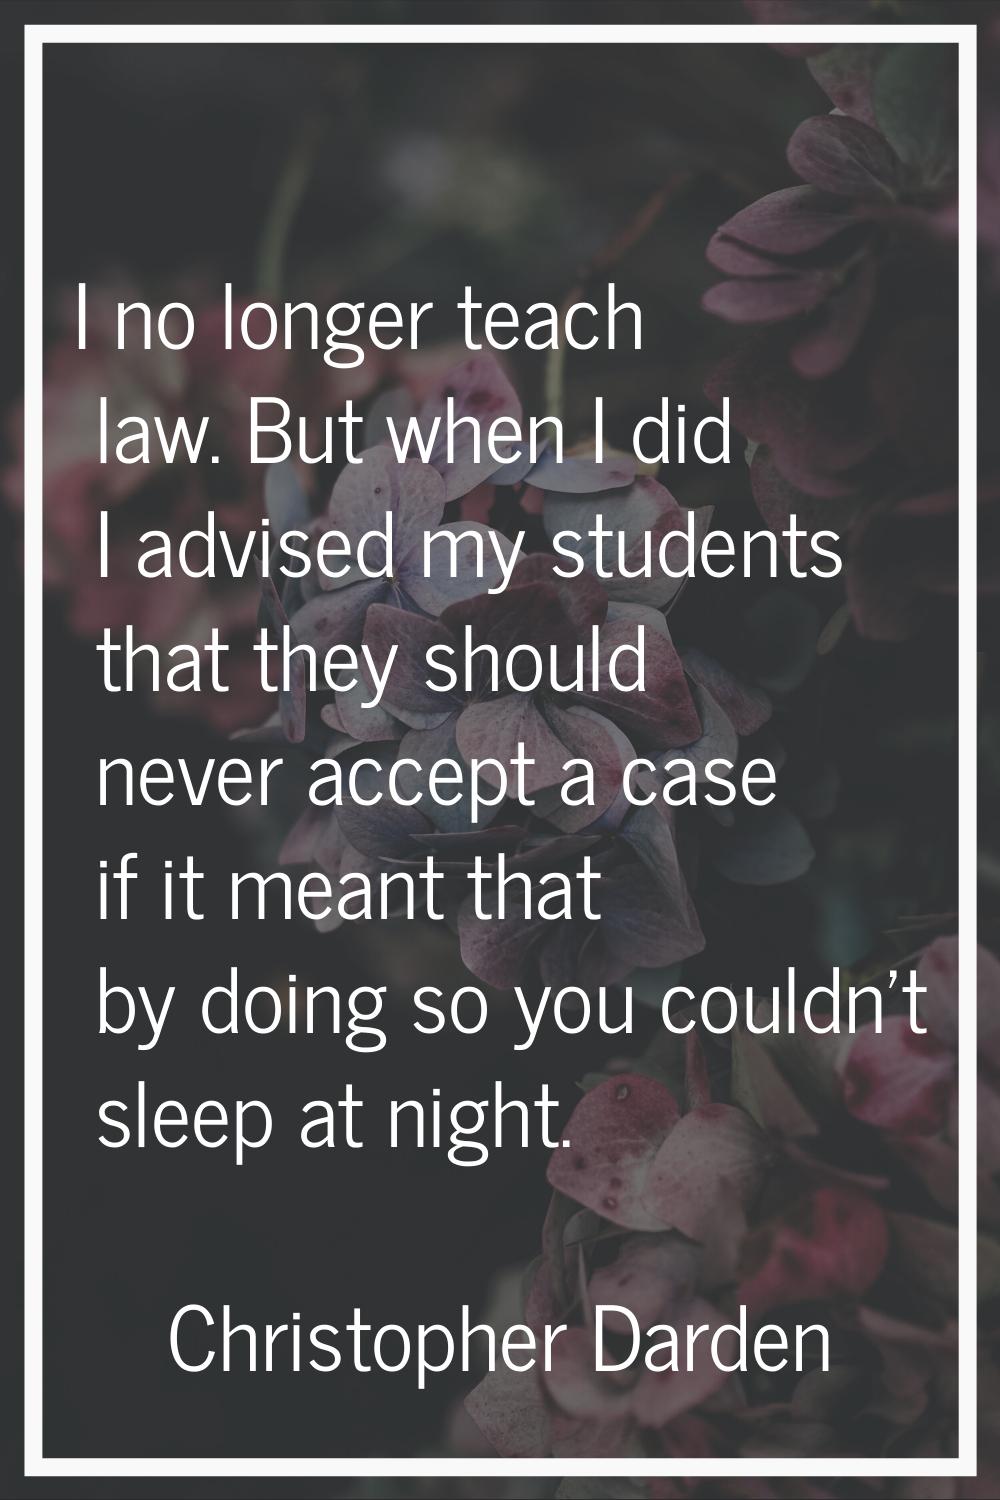 I no longer teach law. But when I did I advised my students that they should never accept a case if